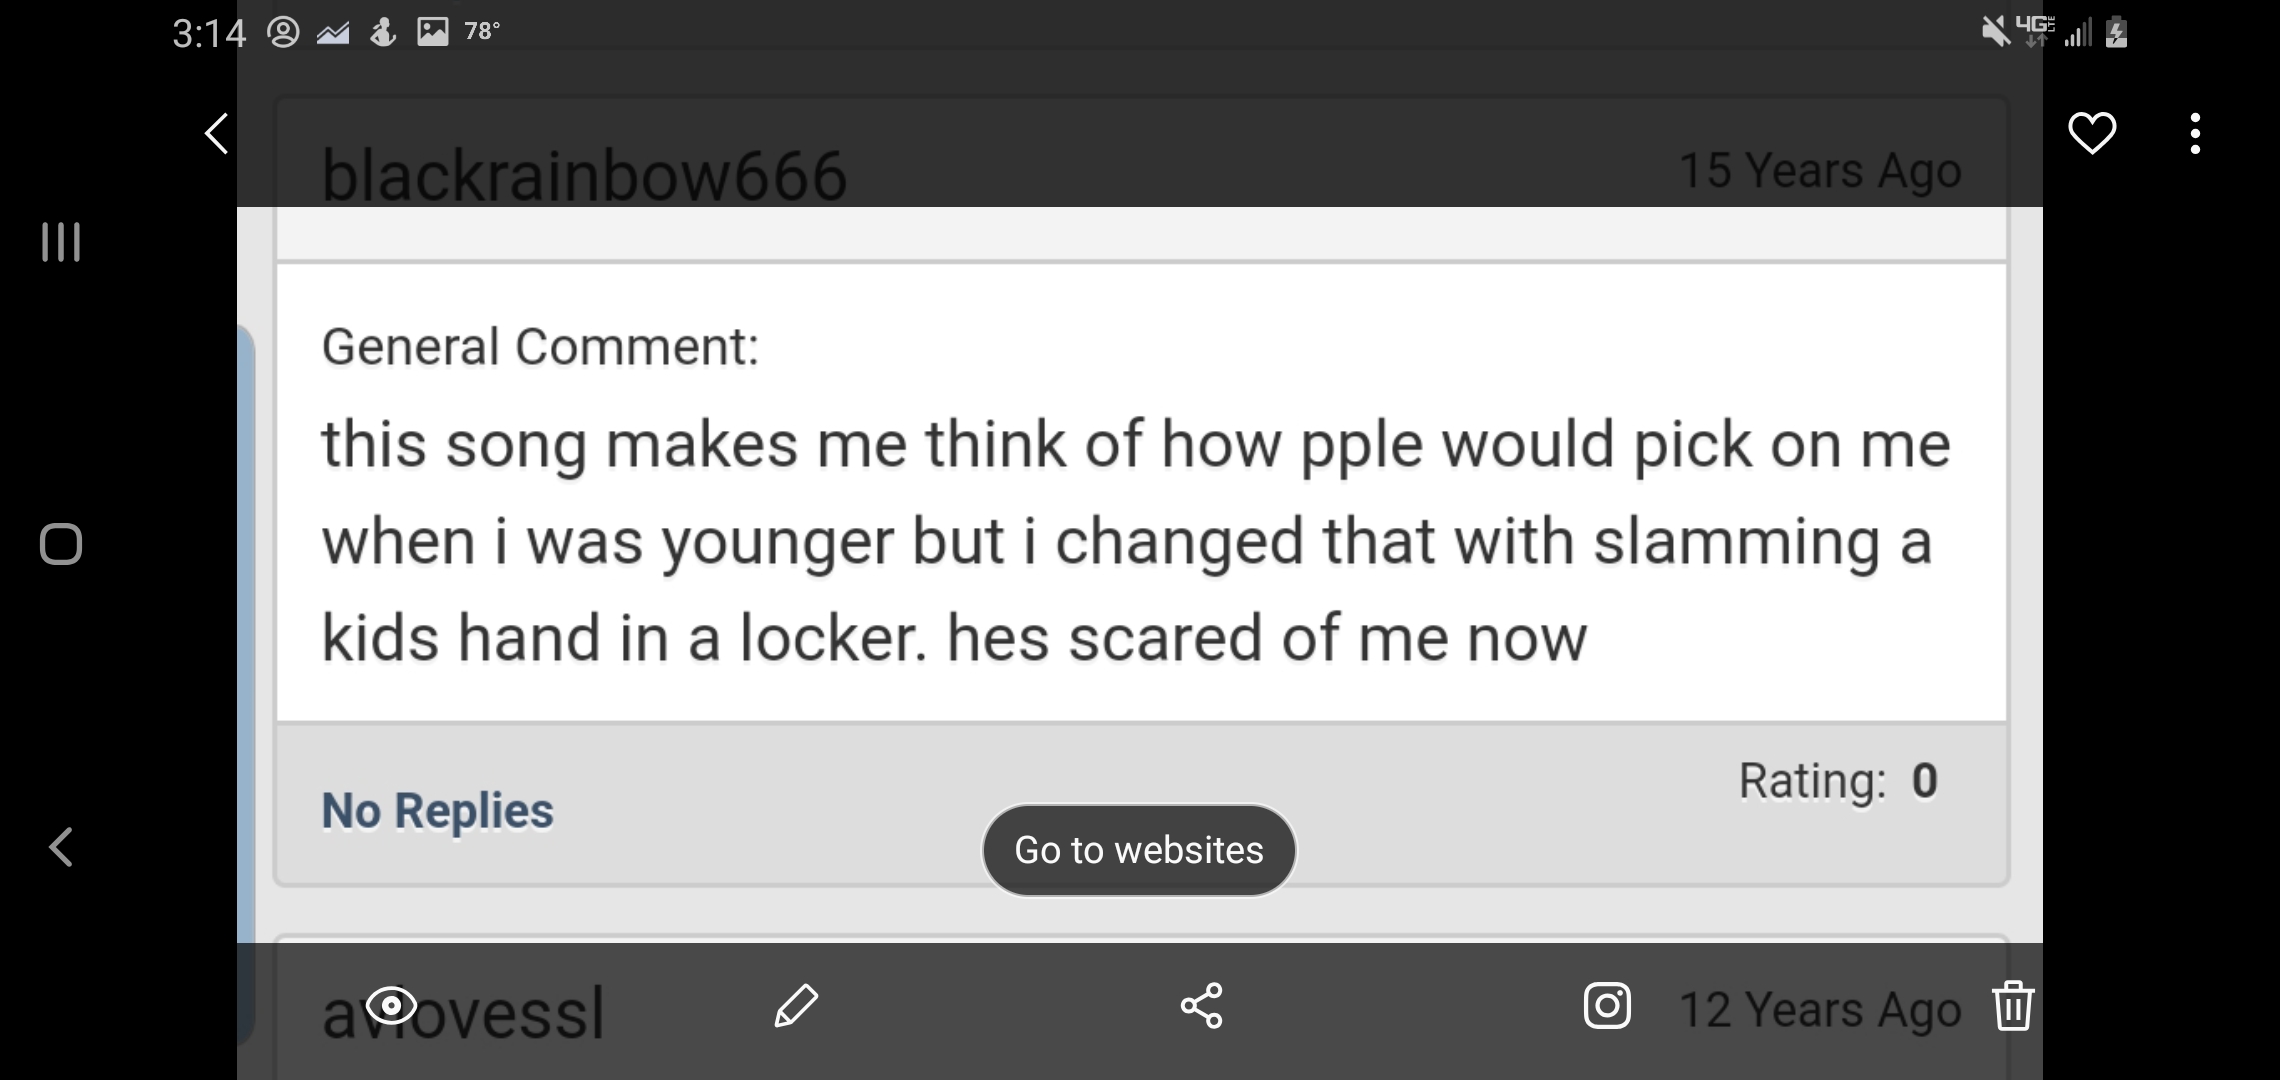 screenshot - @ M 78 blackrainbow666 15 Years Ago General Comment this song makes me think of how pple would pick on me when i was younger but i changed that with slamming a kids hand in a locker. hes scared of me now O Rating 0 No Replies Go to websites a